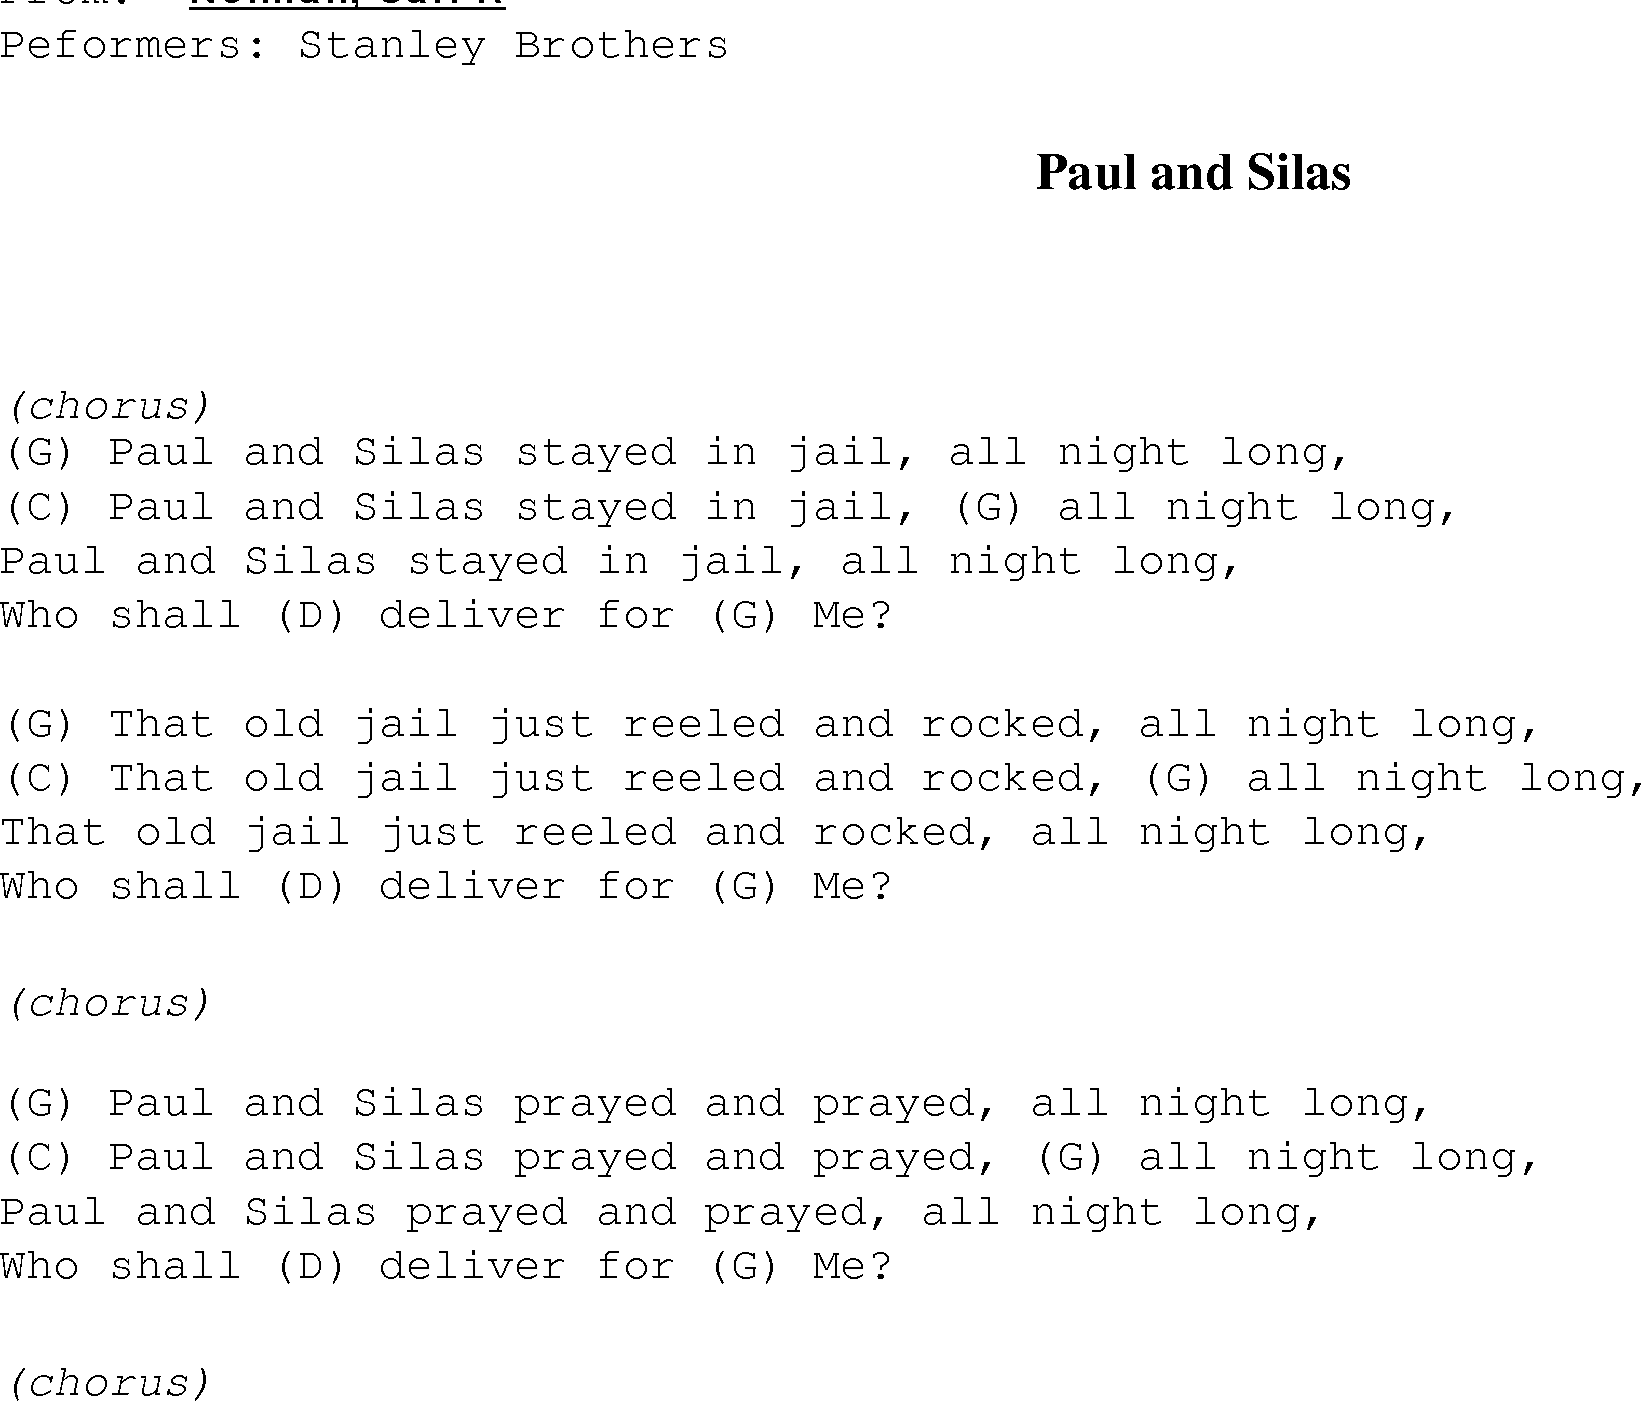 Gospel Song: paul_and_silas, lyrics and chords.